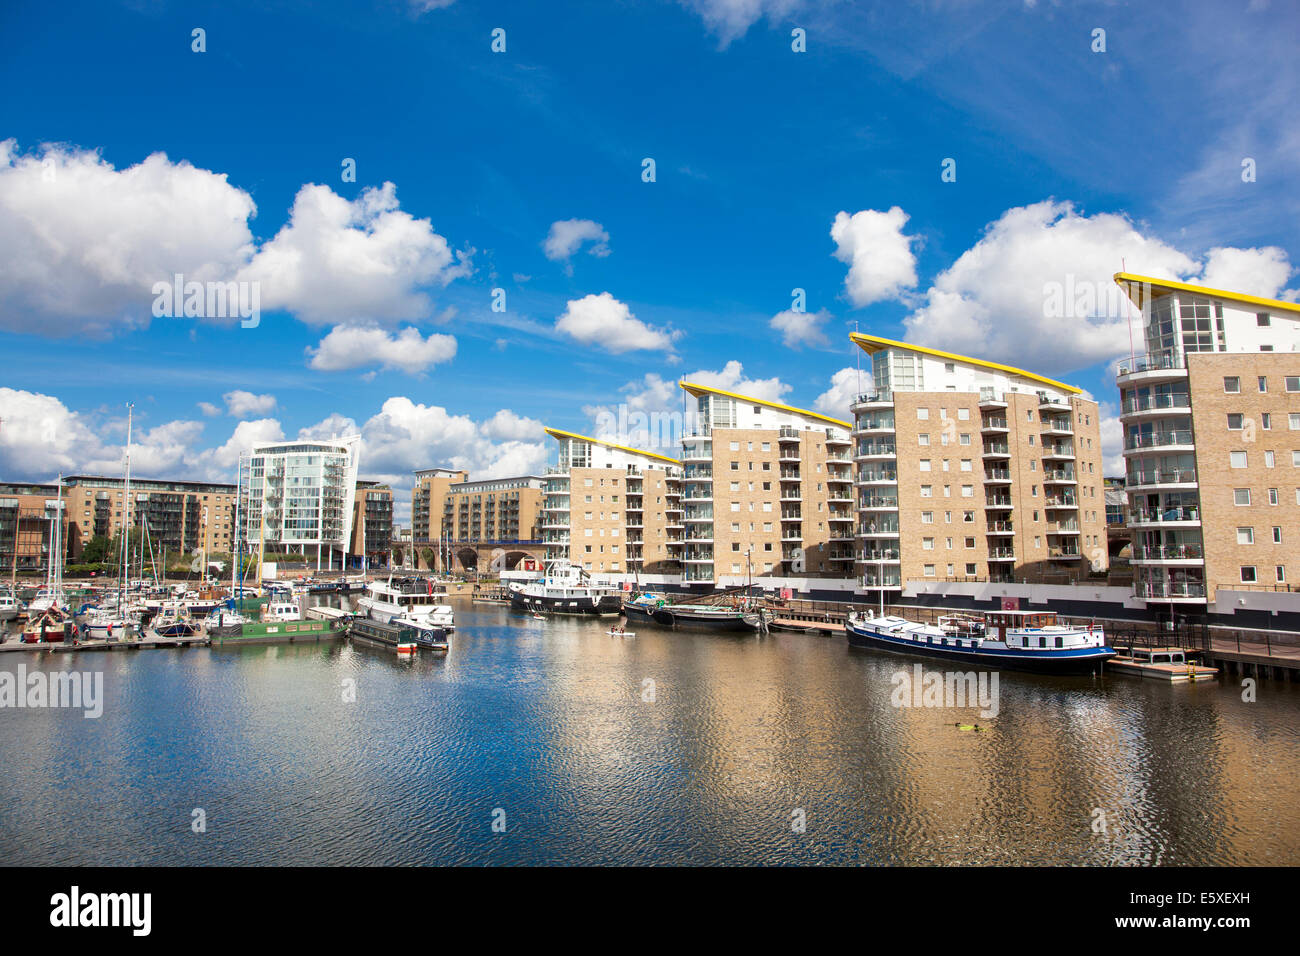 Boats mooring in the Limehouse Basin surrounded by residential blocks, Berglen Court, Pinnacle I and Marina Heights, Tower Hamlets, London, UK Stock Photo